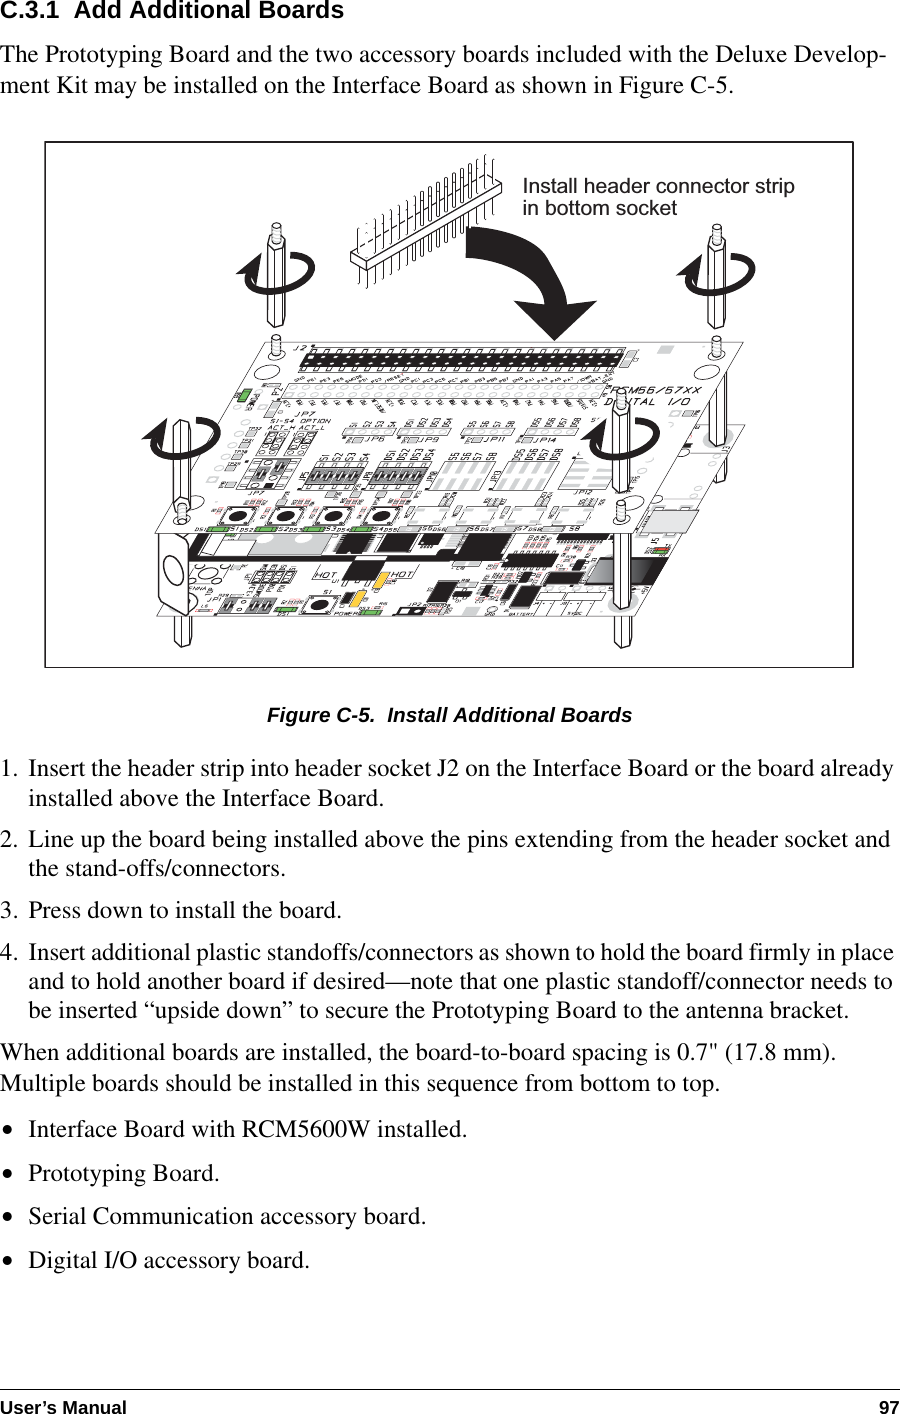 User’s Manual 97C.3.1  Add Additional BoardsThe Prototyping Board and the two accessory boards included with the Deluxe Develop-ment Kit may be installed on the Interface Board as shown in Figure C-5.Figure C-5.  Install Additional Boards1. Insert the header strip into header socket J2 on the Interface Board or the board already installed above the Interface Board.2. Line up the board being installed above the pins extending from the header socket and the stand-offs/connectors.3. Press down to install the board.4. Insert additional plastic standoffs/connectors as shown to hold the board firmly in place and to hold another board if desired—note that one plastic standoff/connector needs to be inserted “upside down” to secure the Prototyping Board to the antenna bracket.When additional boards are installed, the board-to-board spacing is 0.7&quot; (17.8 mm). Multiple boards should be installed in this sequence from bottom to top.•Interface Board with RCM5600W installed.•Prototyping Board.•Serial Communication accessory board.•Digital I/O accessory board.Install header connector stripin bottom socket